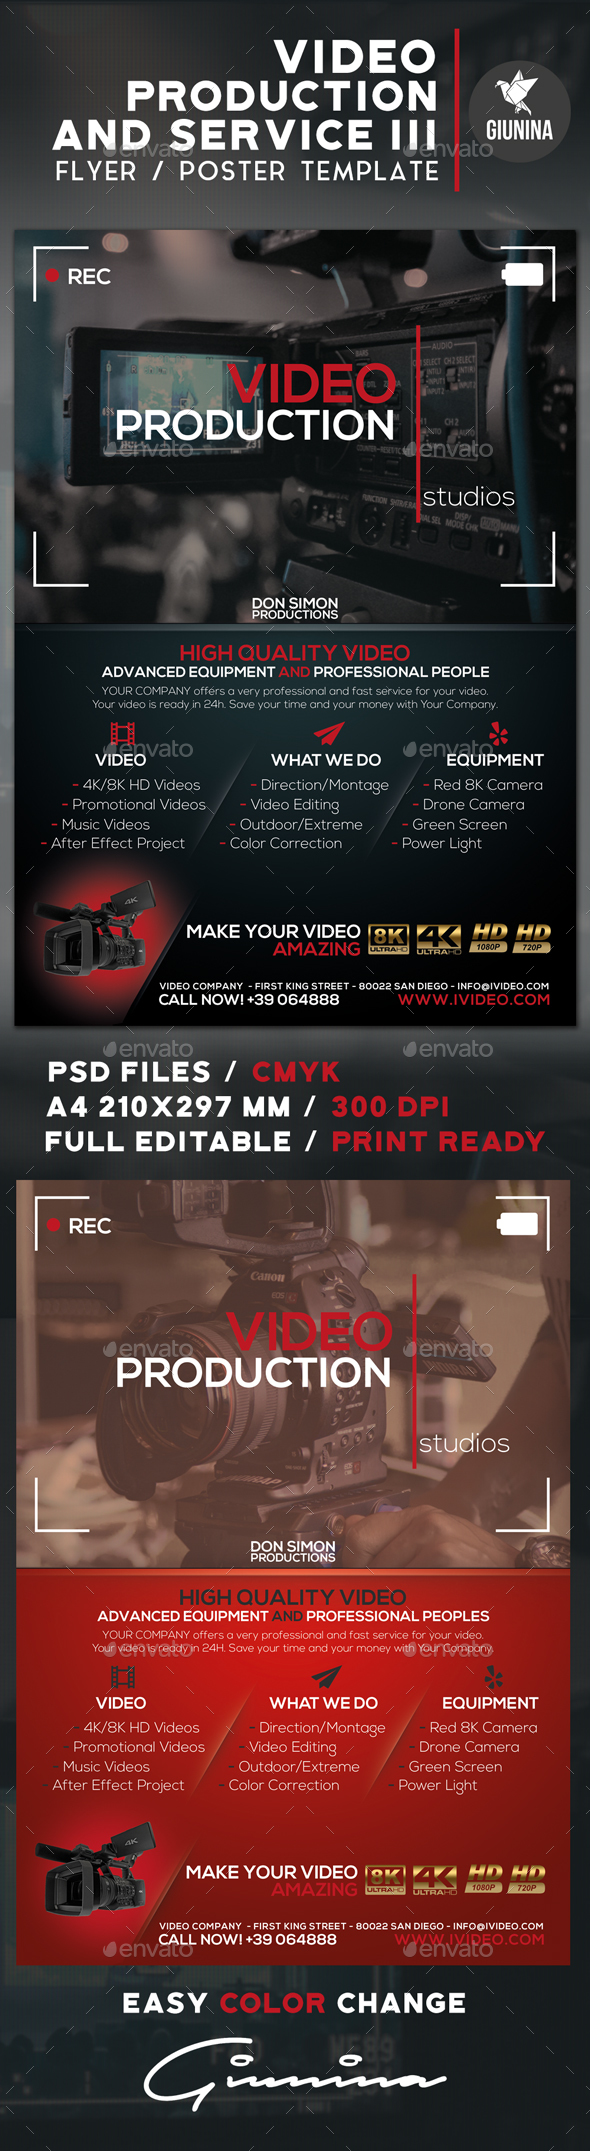 Video Production And Services 3 Flyer/Poster